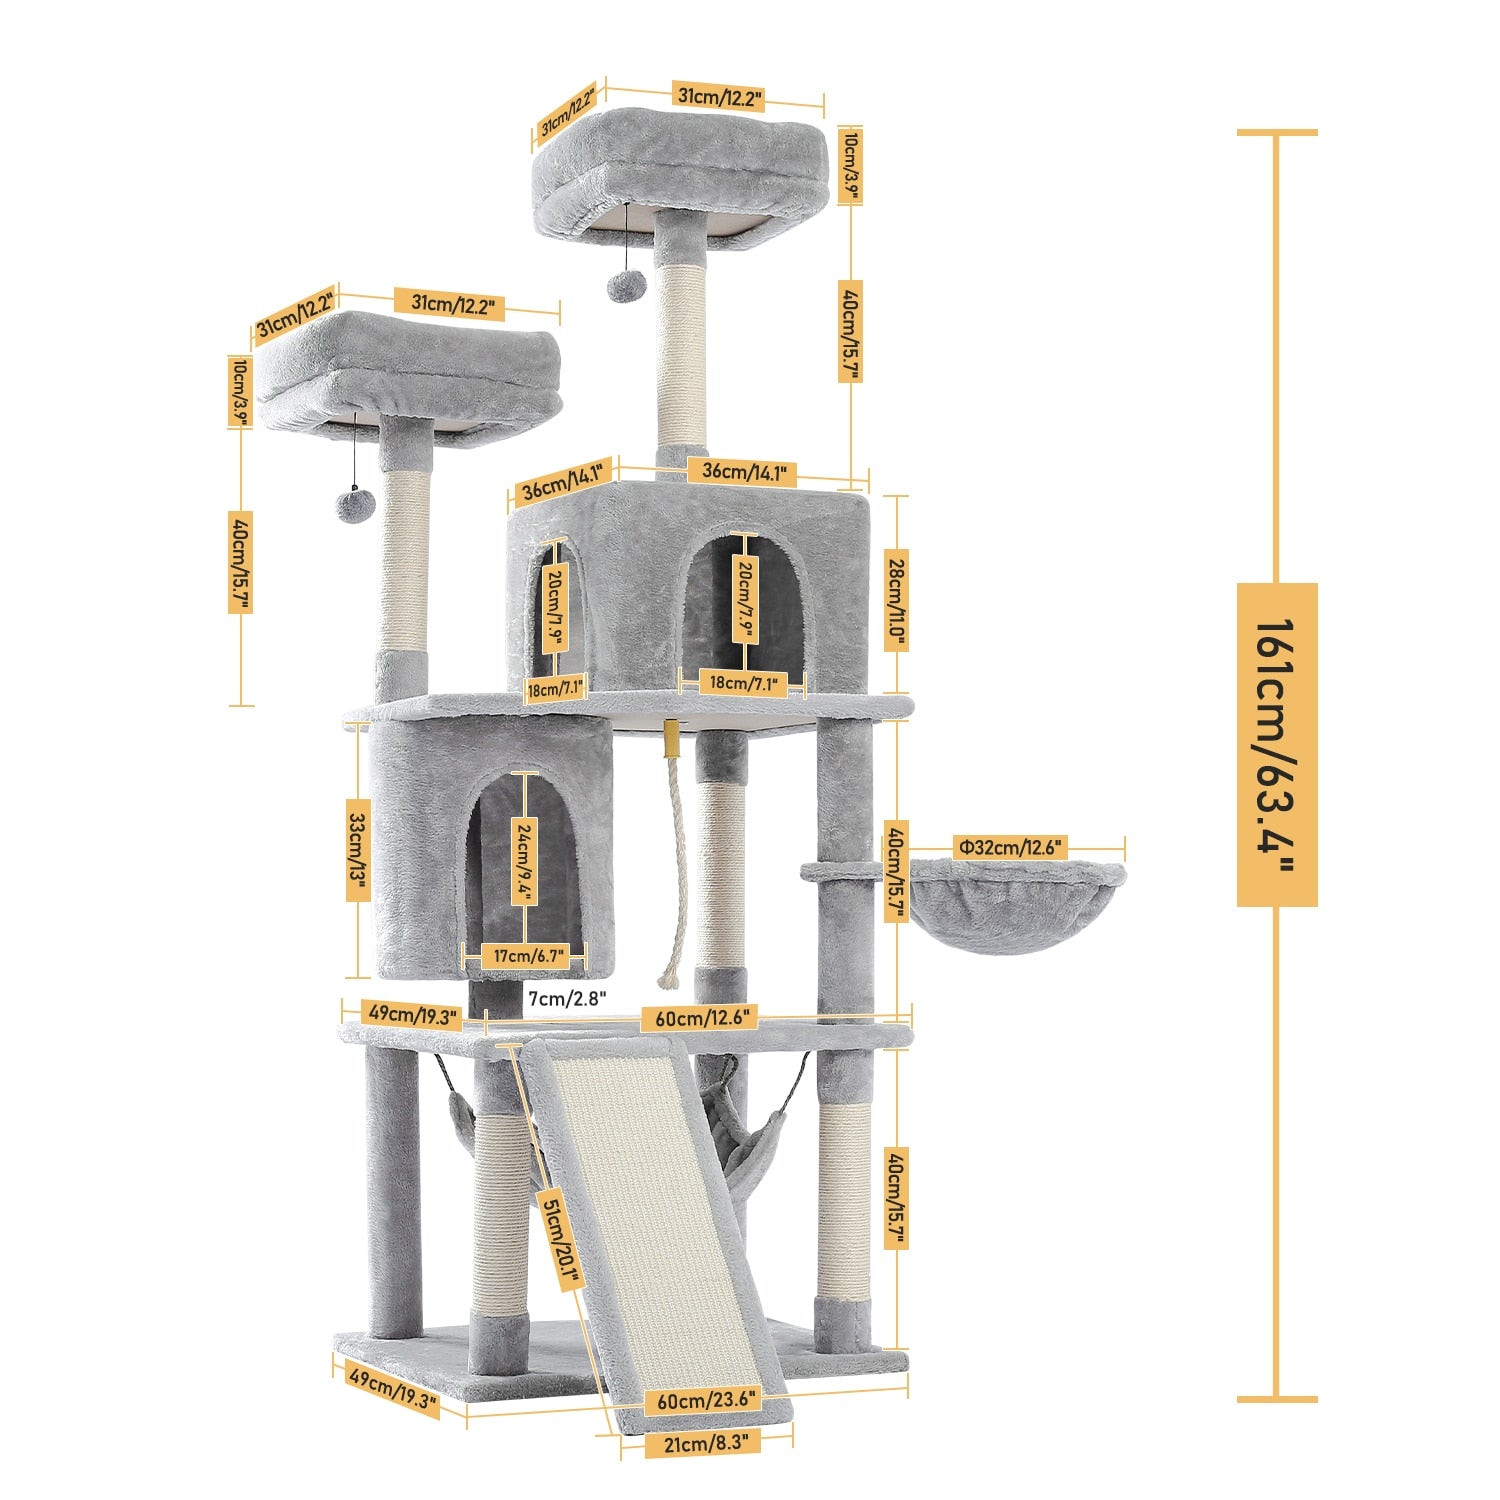 2022 New Design Luxury Large Cat Climbing Frame Multi-Layer Scratching Post With Resistant Sisal Cat Tree Kittern Playground - RY MARKET PLACE